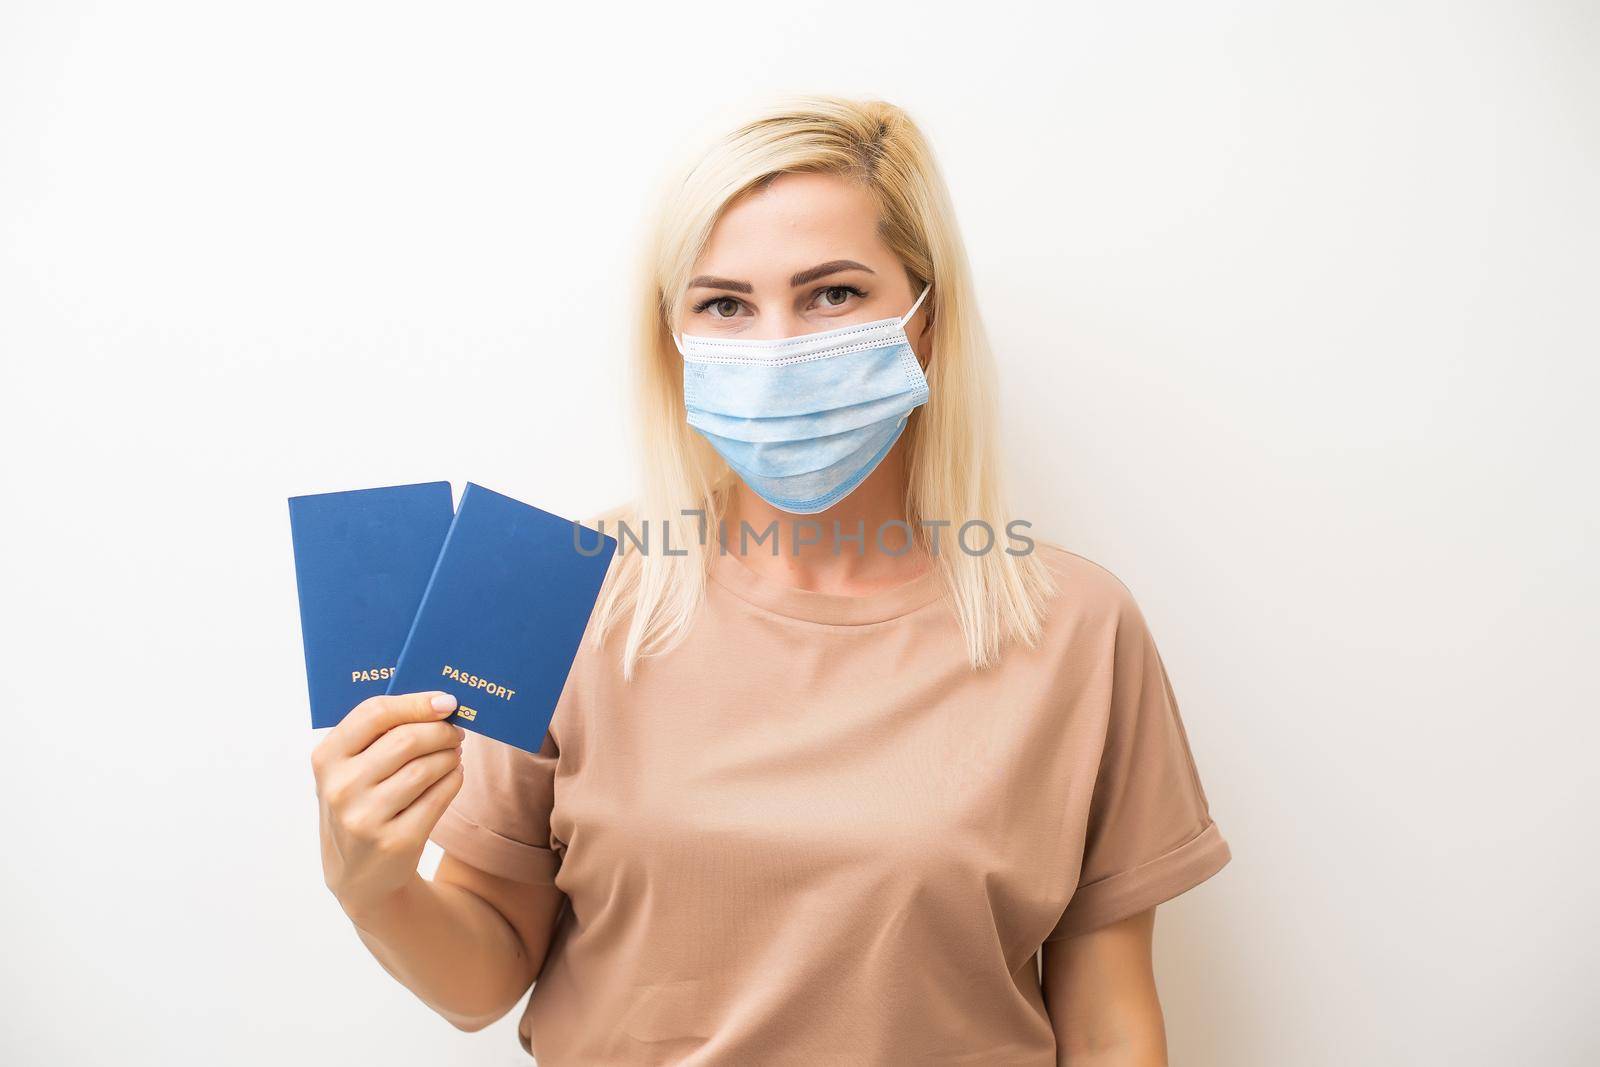 Covid-19 Health Passport. masked woman holding passports by Andelov13